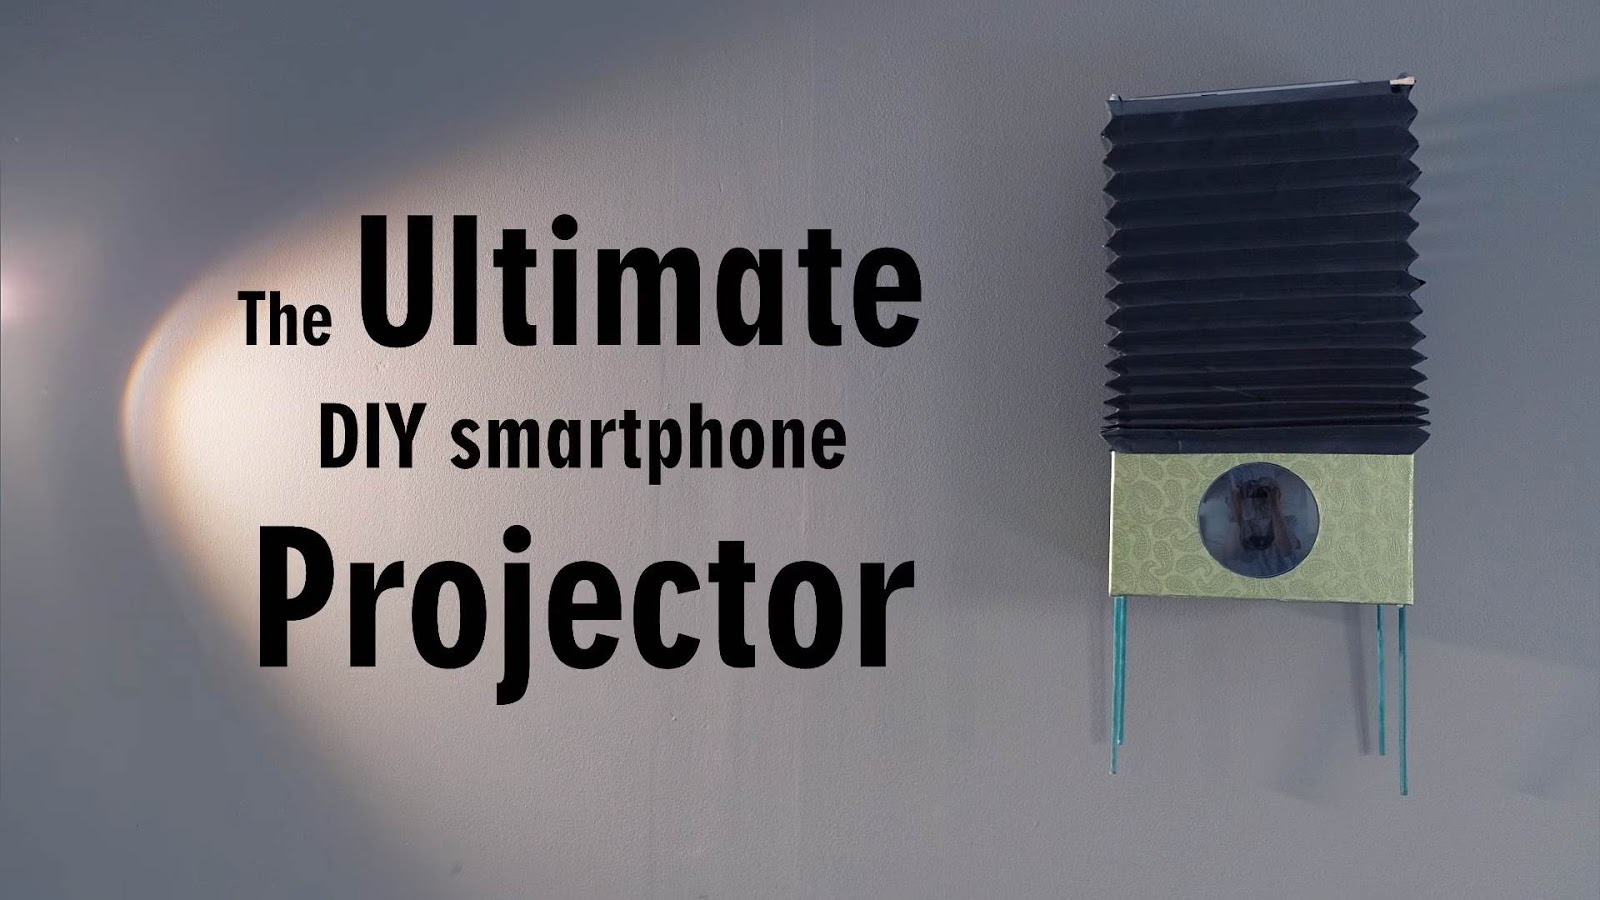 How to Build The Ultimate Smartphone Projector